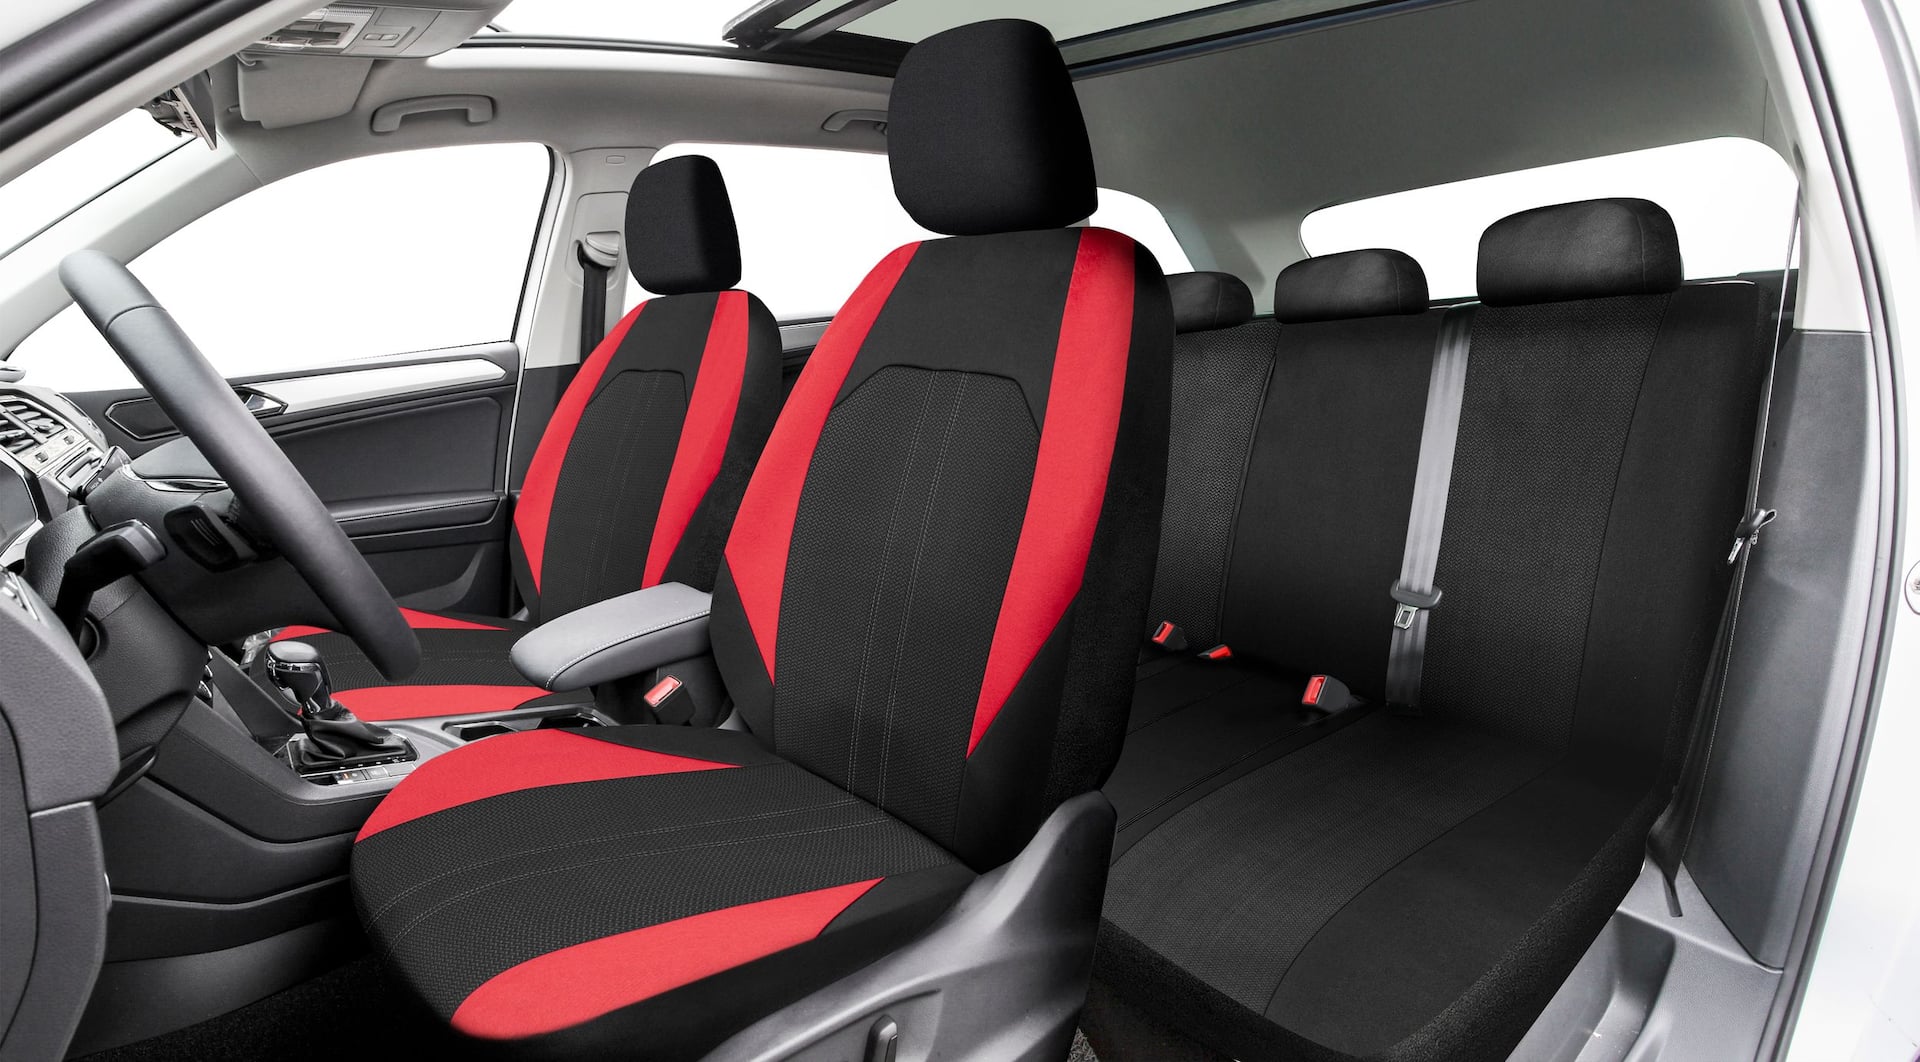 AutoTrends Black & Red Sports Car Seat Cover Kit for Back Bench